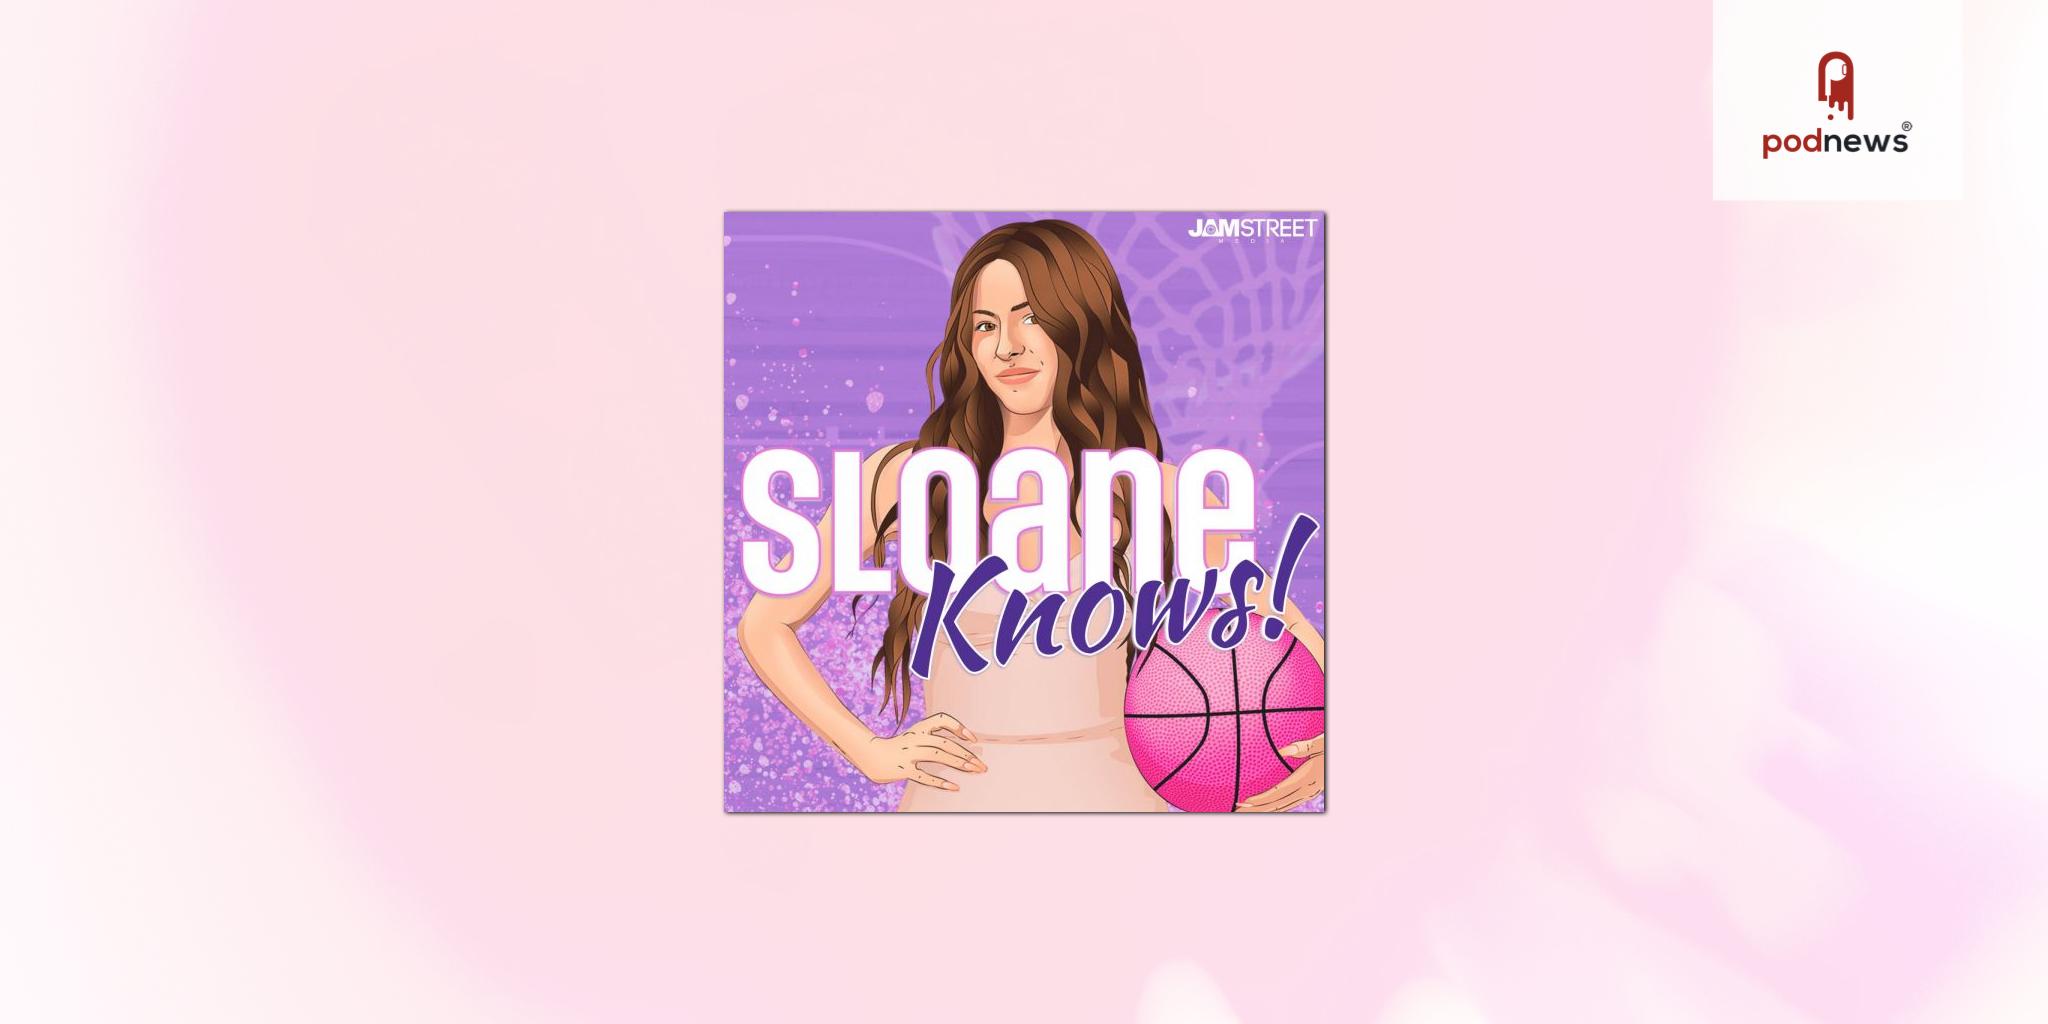 Jam Street Media Launches “Sloane Knows,” A New NBA Show With A Gen Z Twist